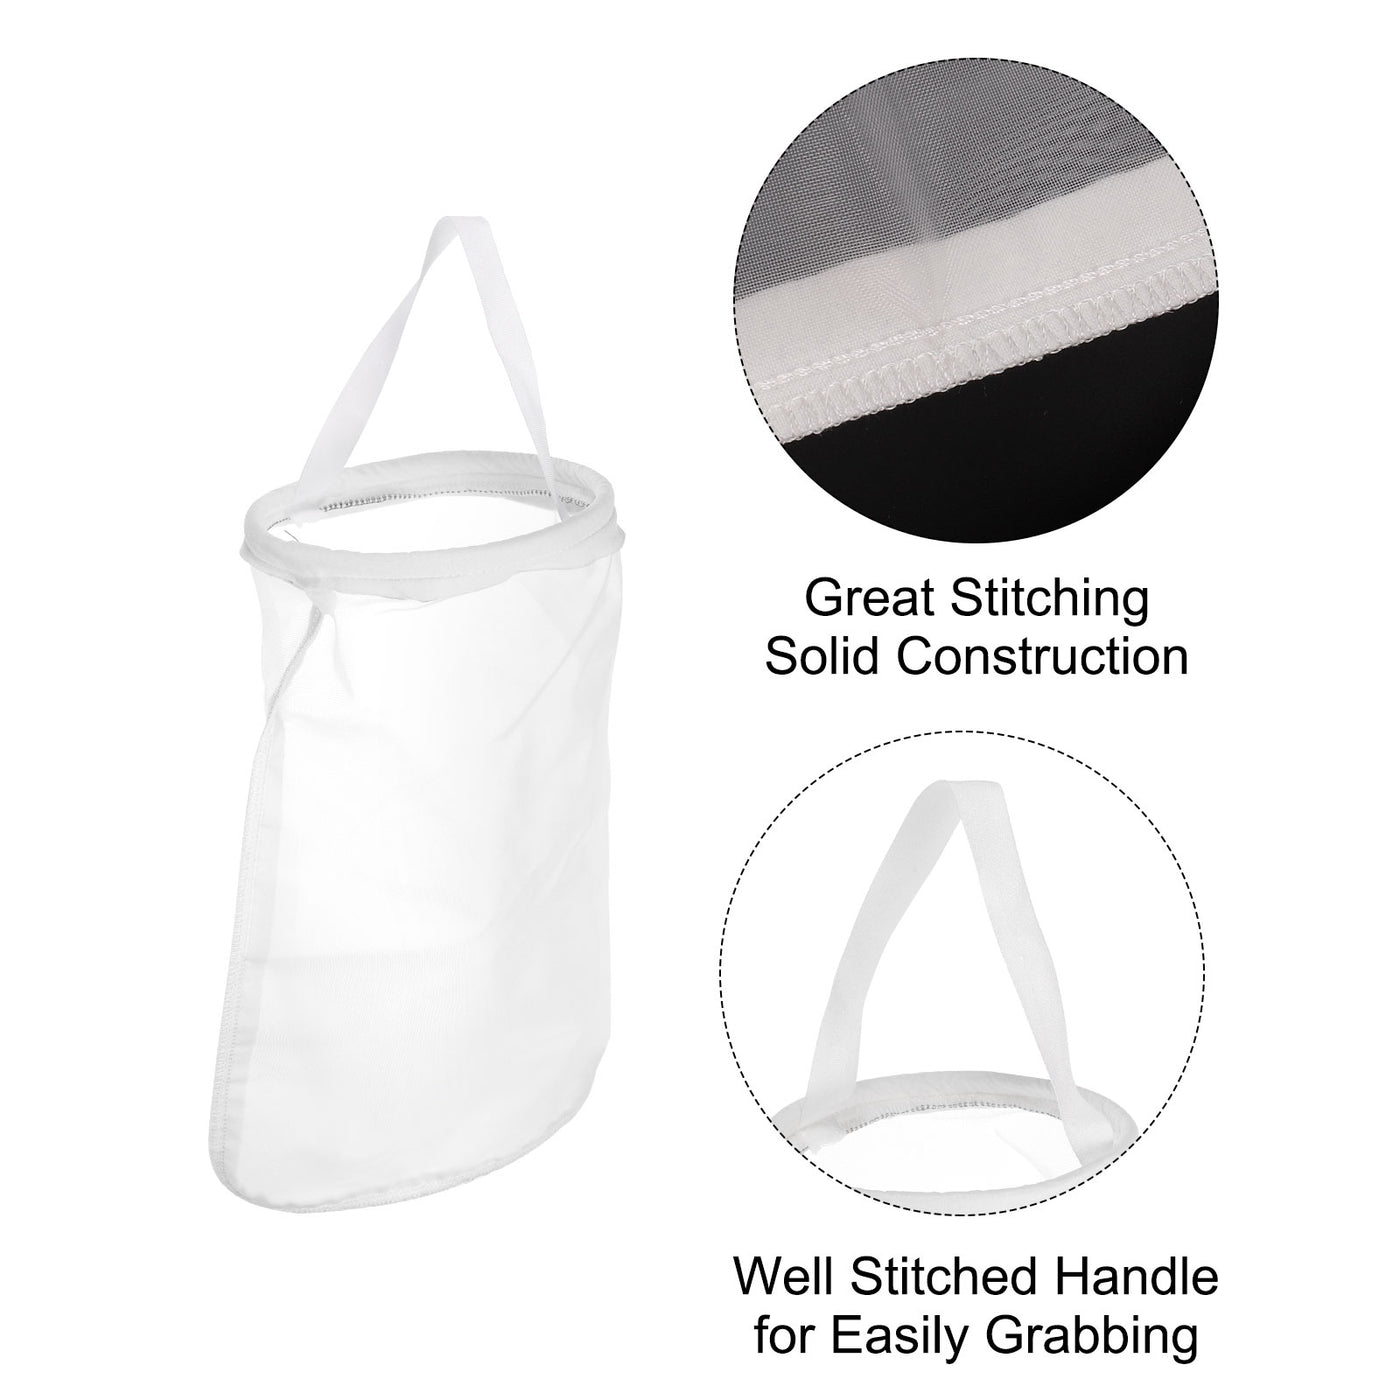 uxcell Uxcell Paint Filter Bag 60 Mesh (16.9"x7") Nylon Strainer for Filtering Paint